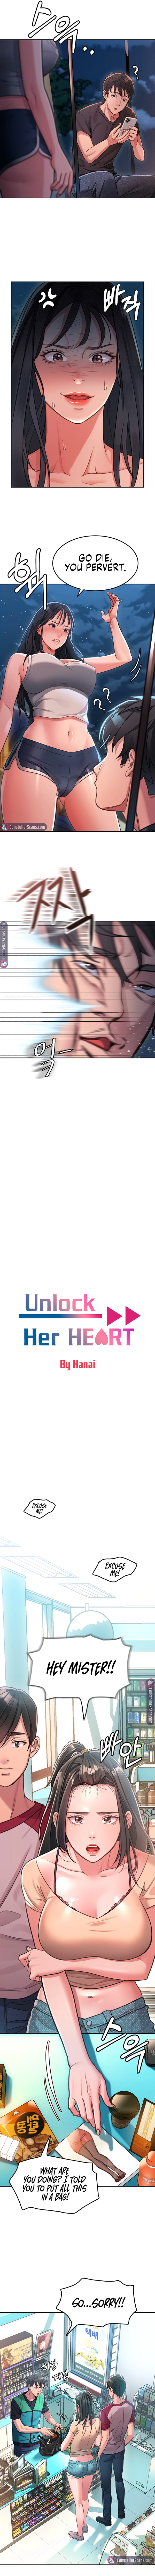 Unlock Her Heart - Chapter 1 Page 3